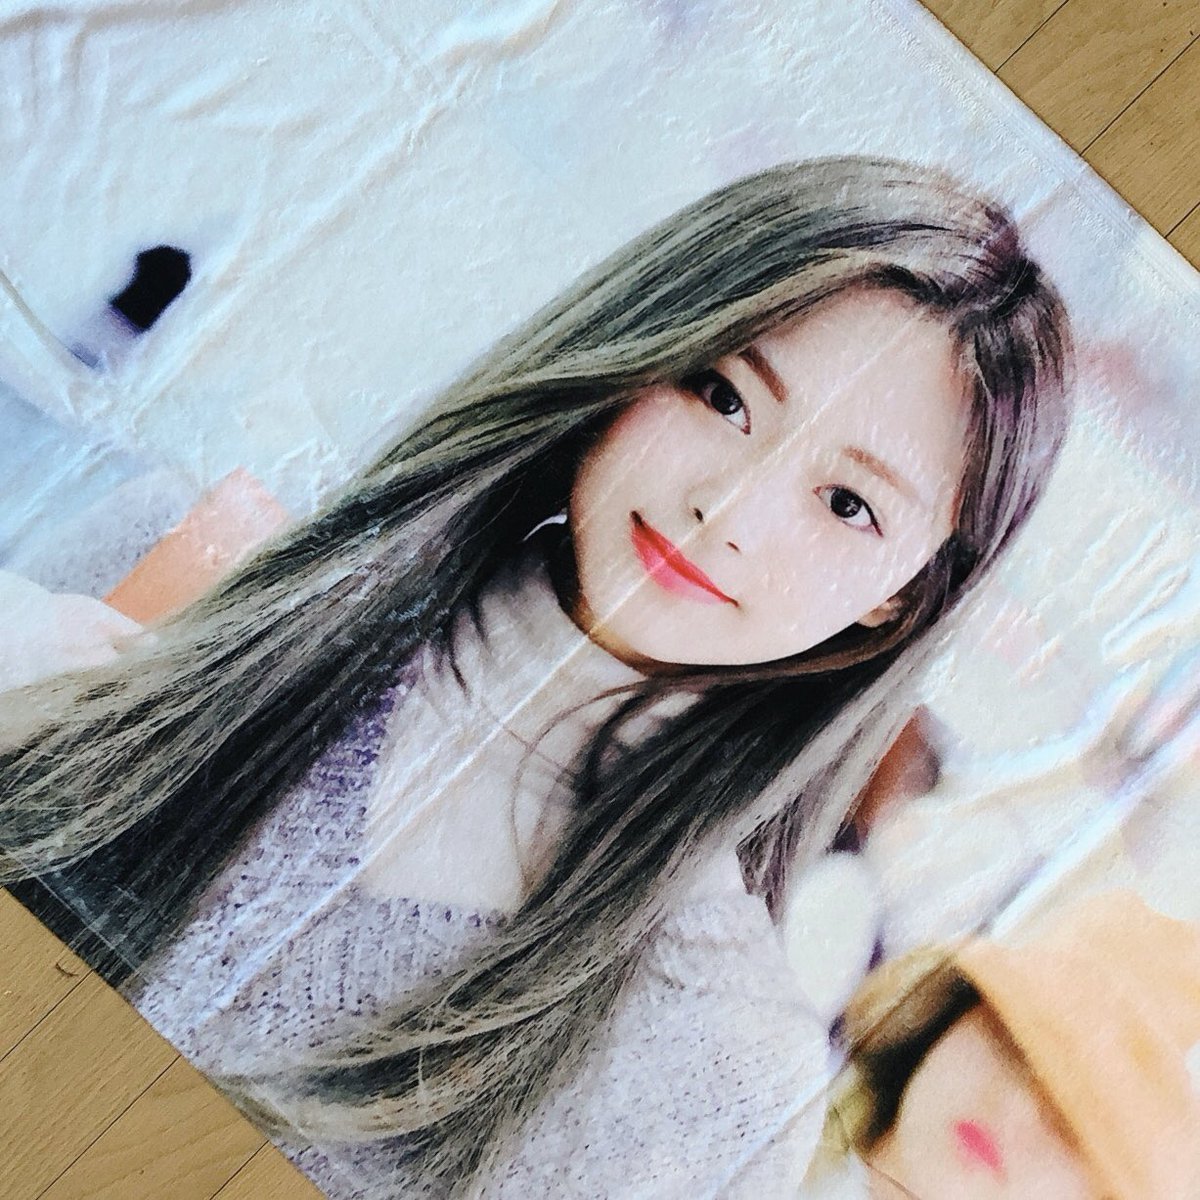 Anneyeong Porkies!TWICE TZUYU OSWY 2  @delta_trap PH GOPHP 2,300 SET A 1st photo PHP 3,400 SET B Both photosDOO AUG 14DOP AUG 15SHIP TO PH (SATURDAY, after receiving from masternim)Need 5 slots to order!  #TWICE    #TZUYU  #RT  #kpopSelling  #KpopPh